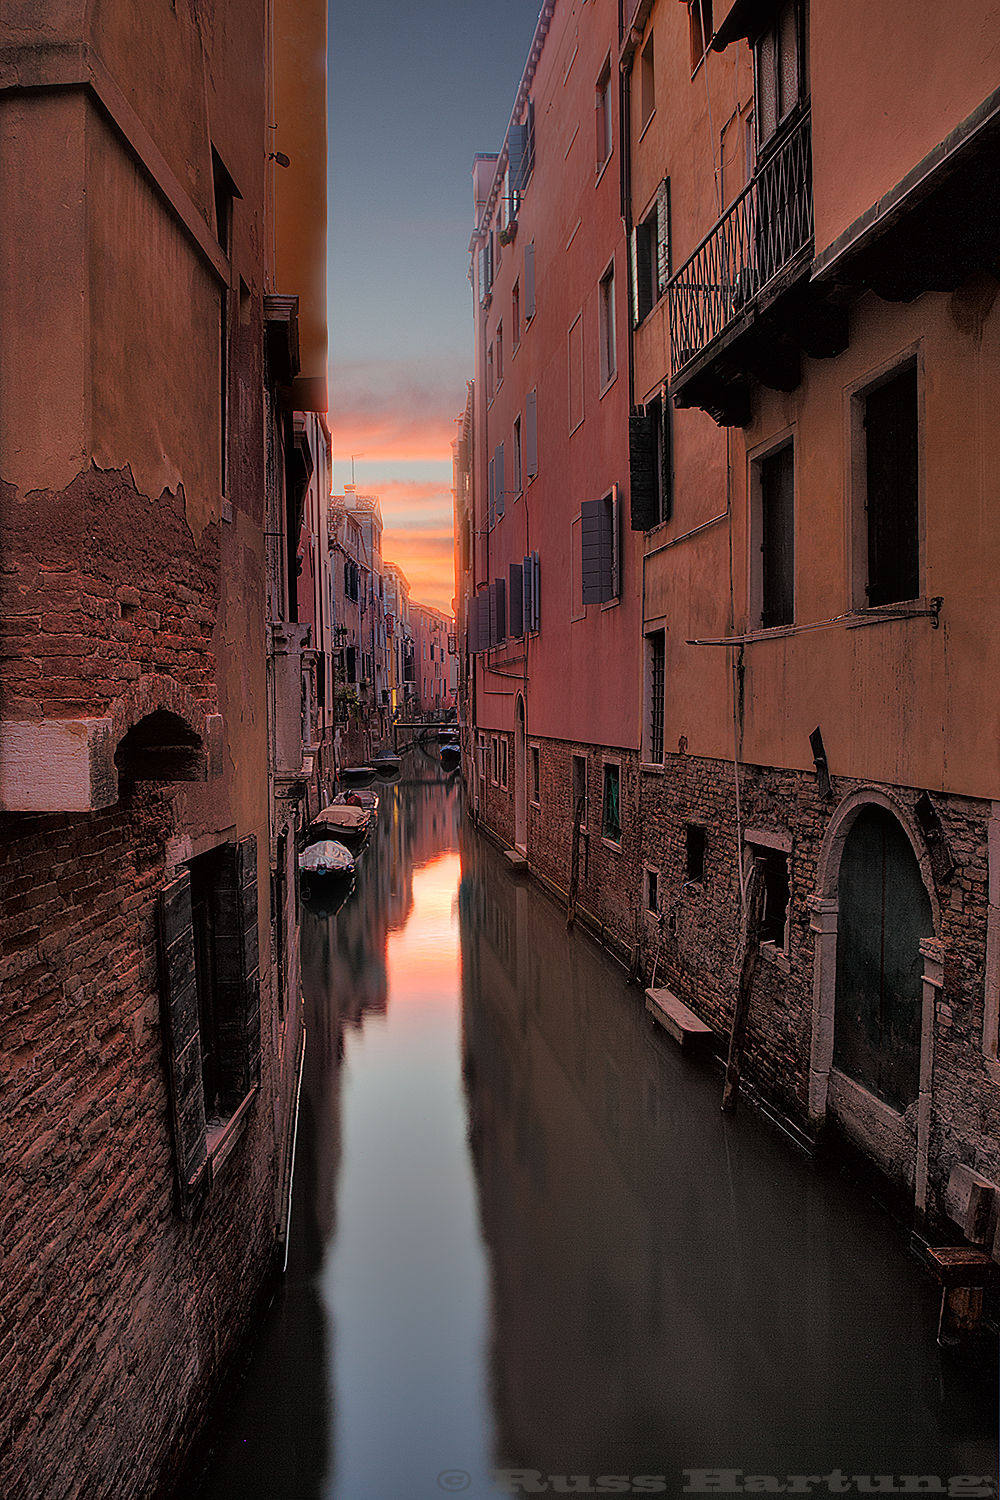 Sunrise over one of the many canals in Venice, Italy.